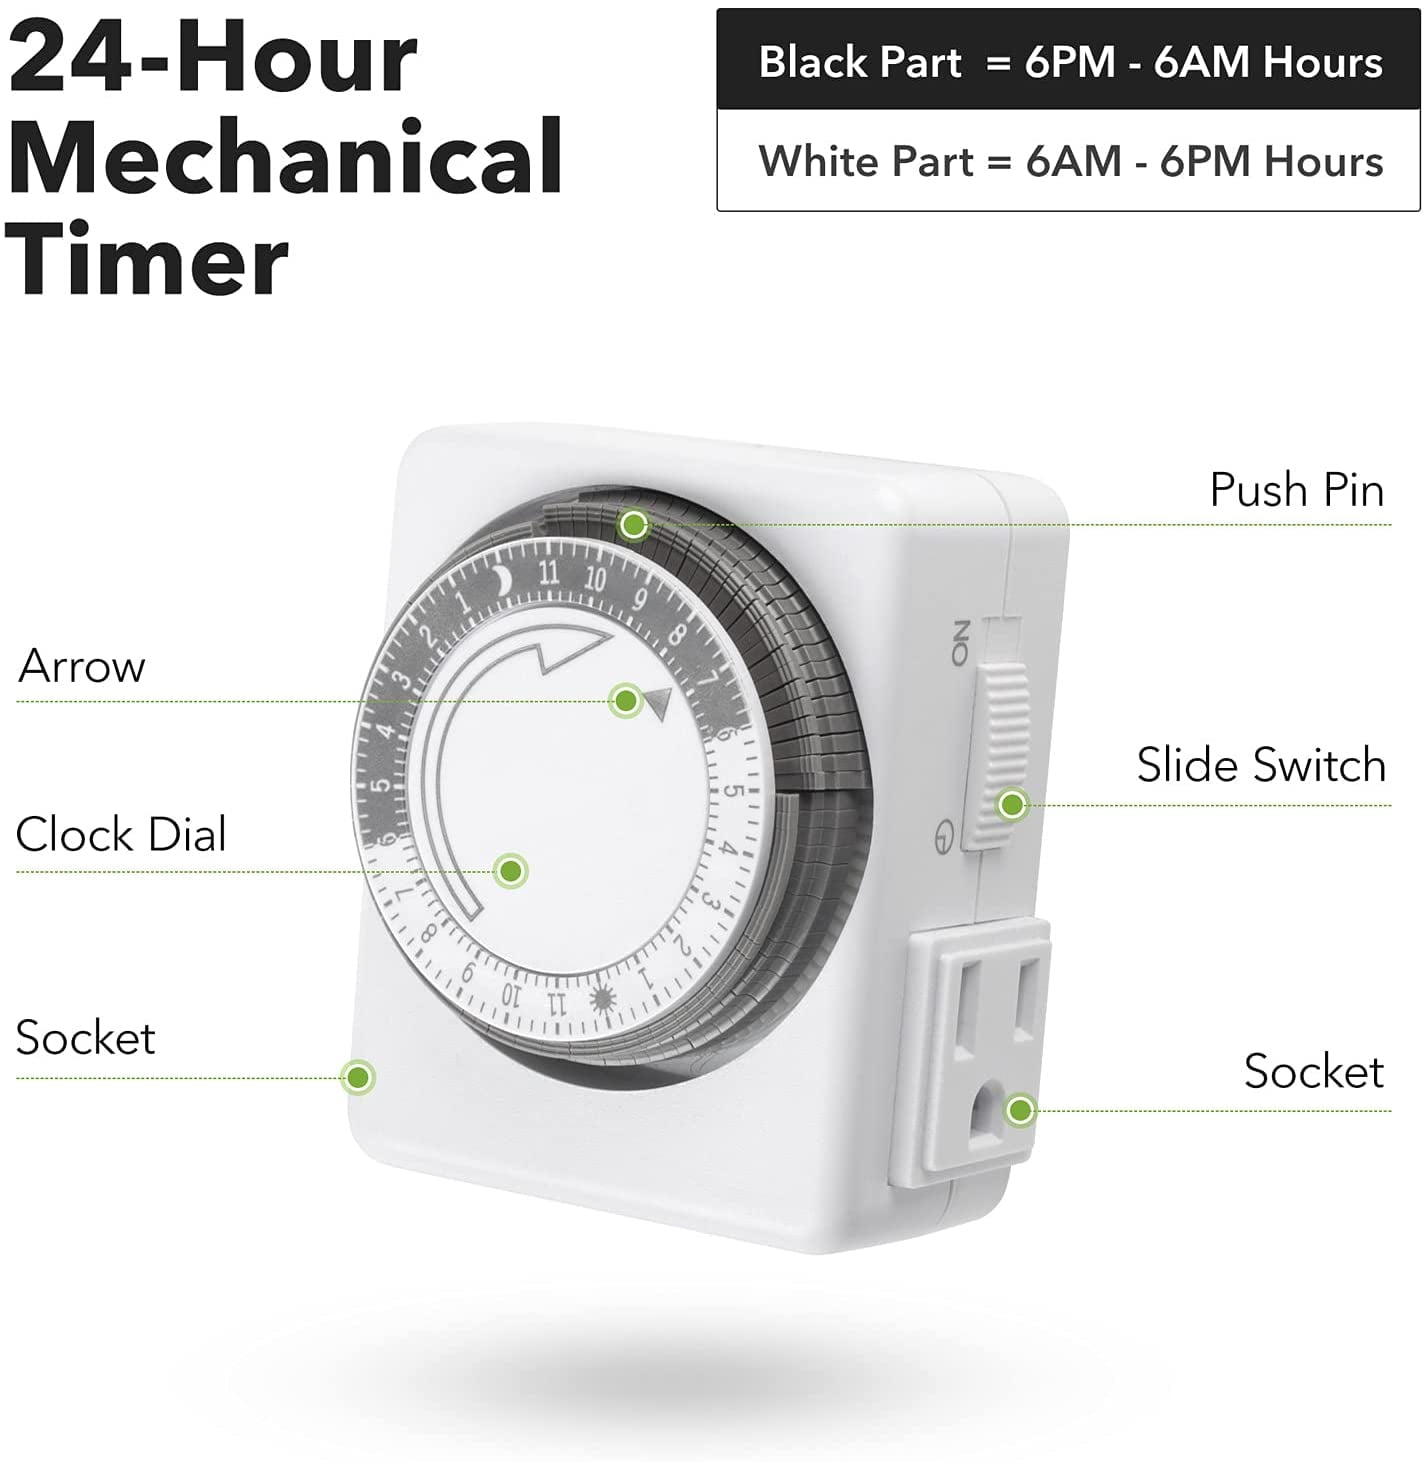 G-Homa Timers for Electrical Outlets, 24 Hour Indoor Plug-In Mechanical Timer Mini, 30 Minute Intervals, 3-Prong, Daily On/Off Cycle, for Lights